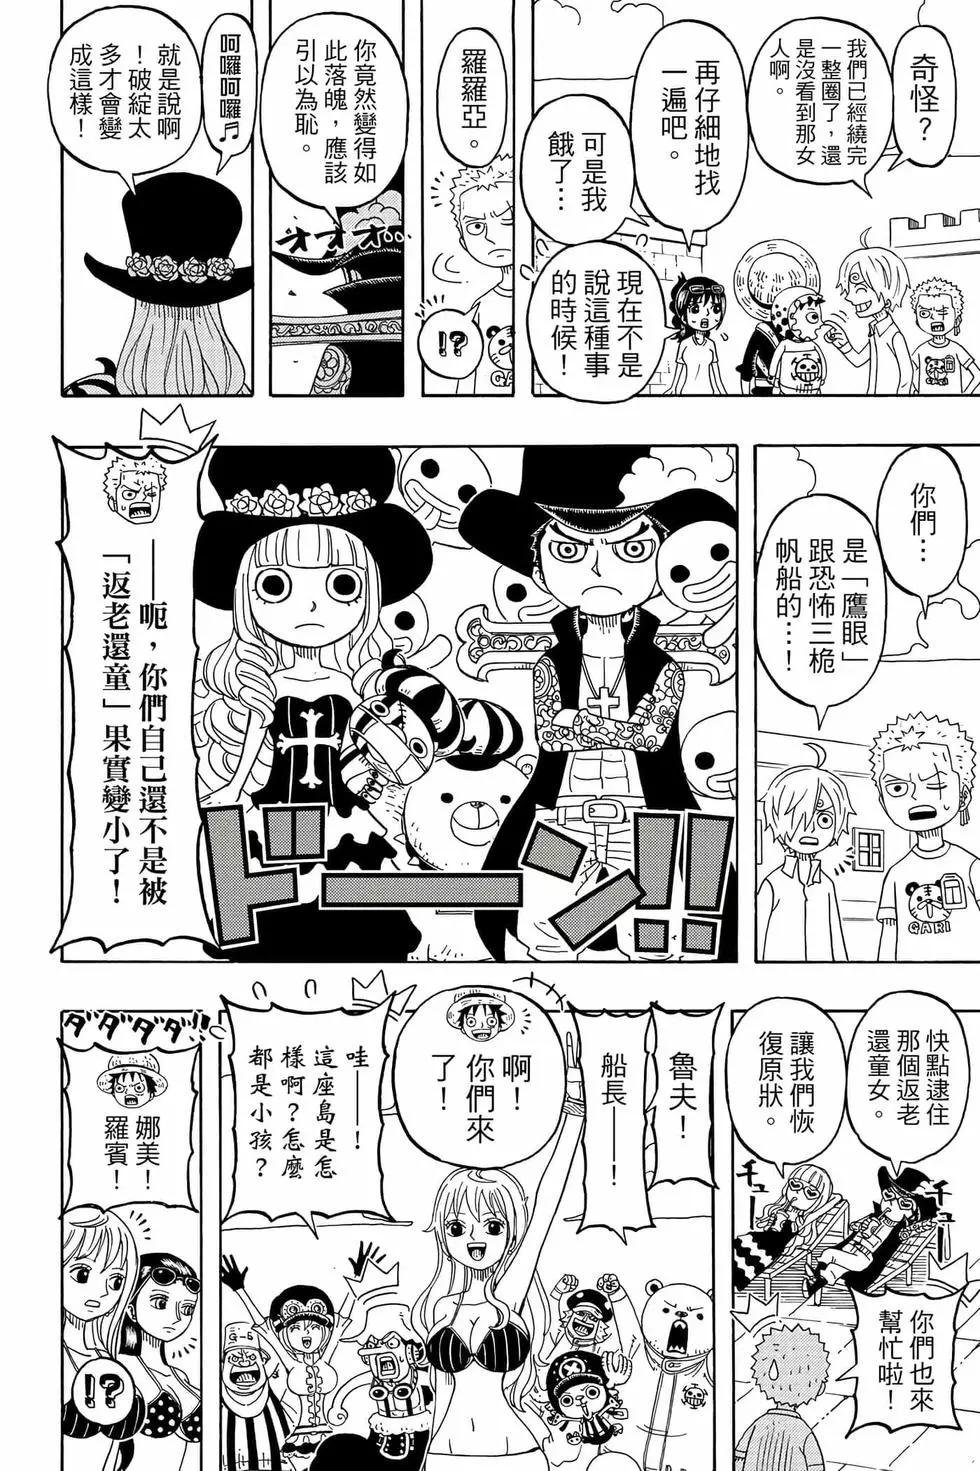 One piece party - 第05卷(1/4) - 7